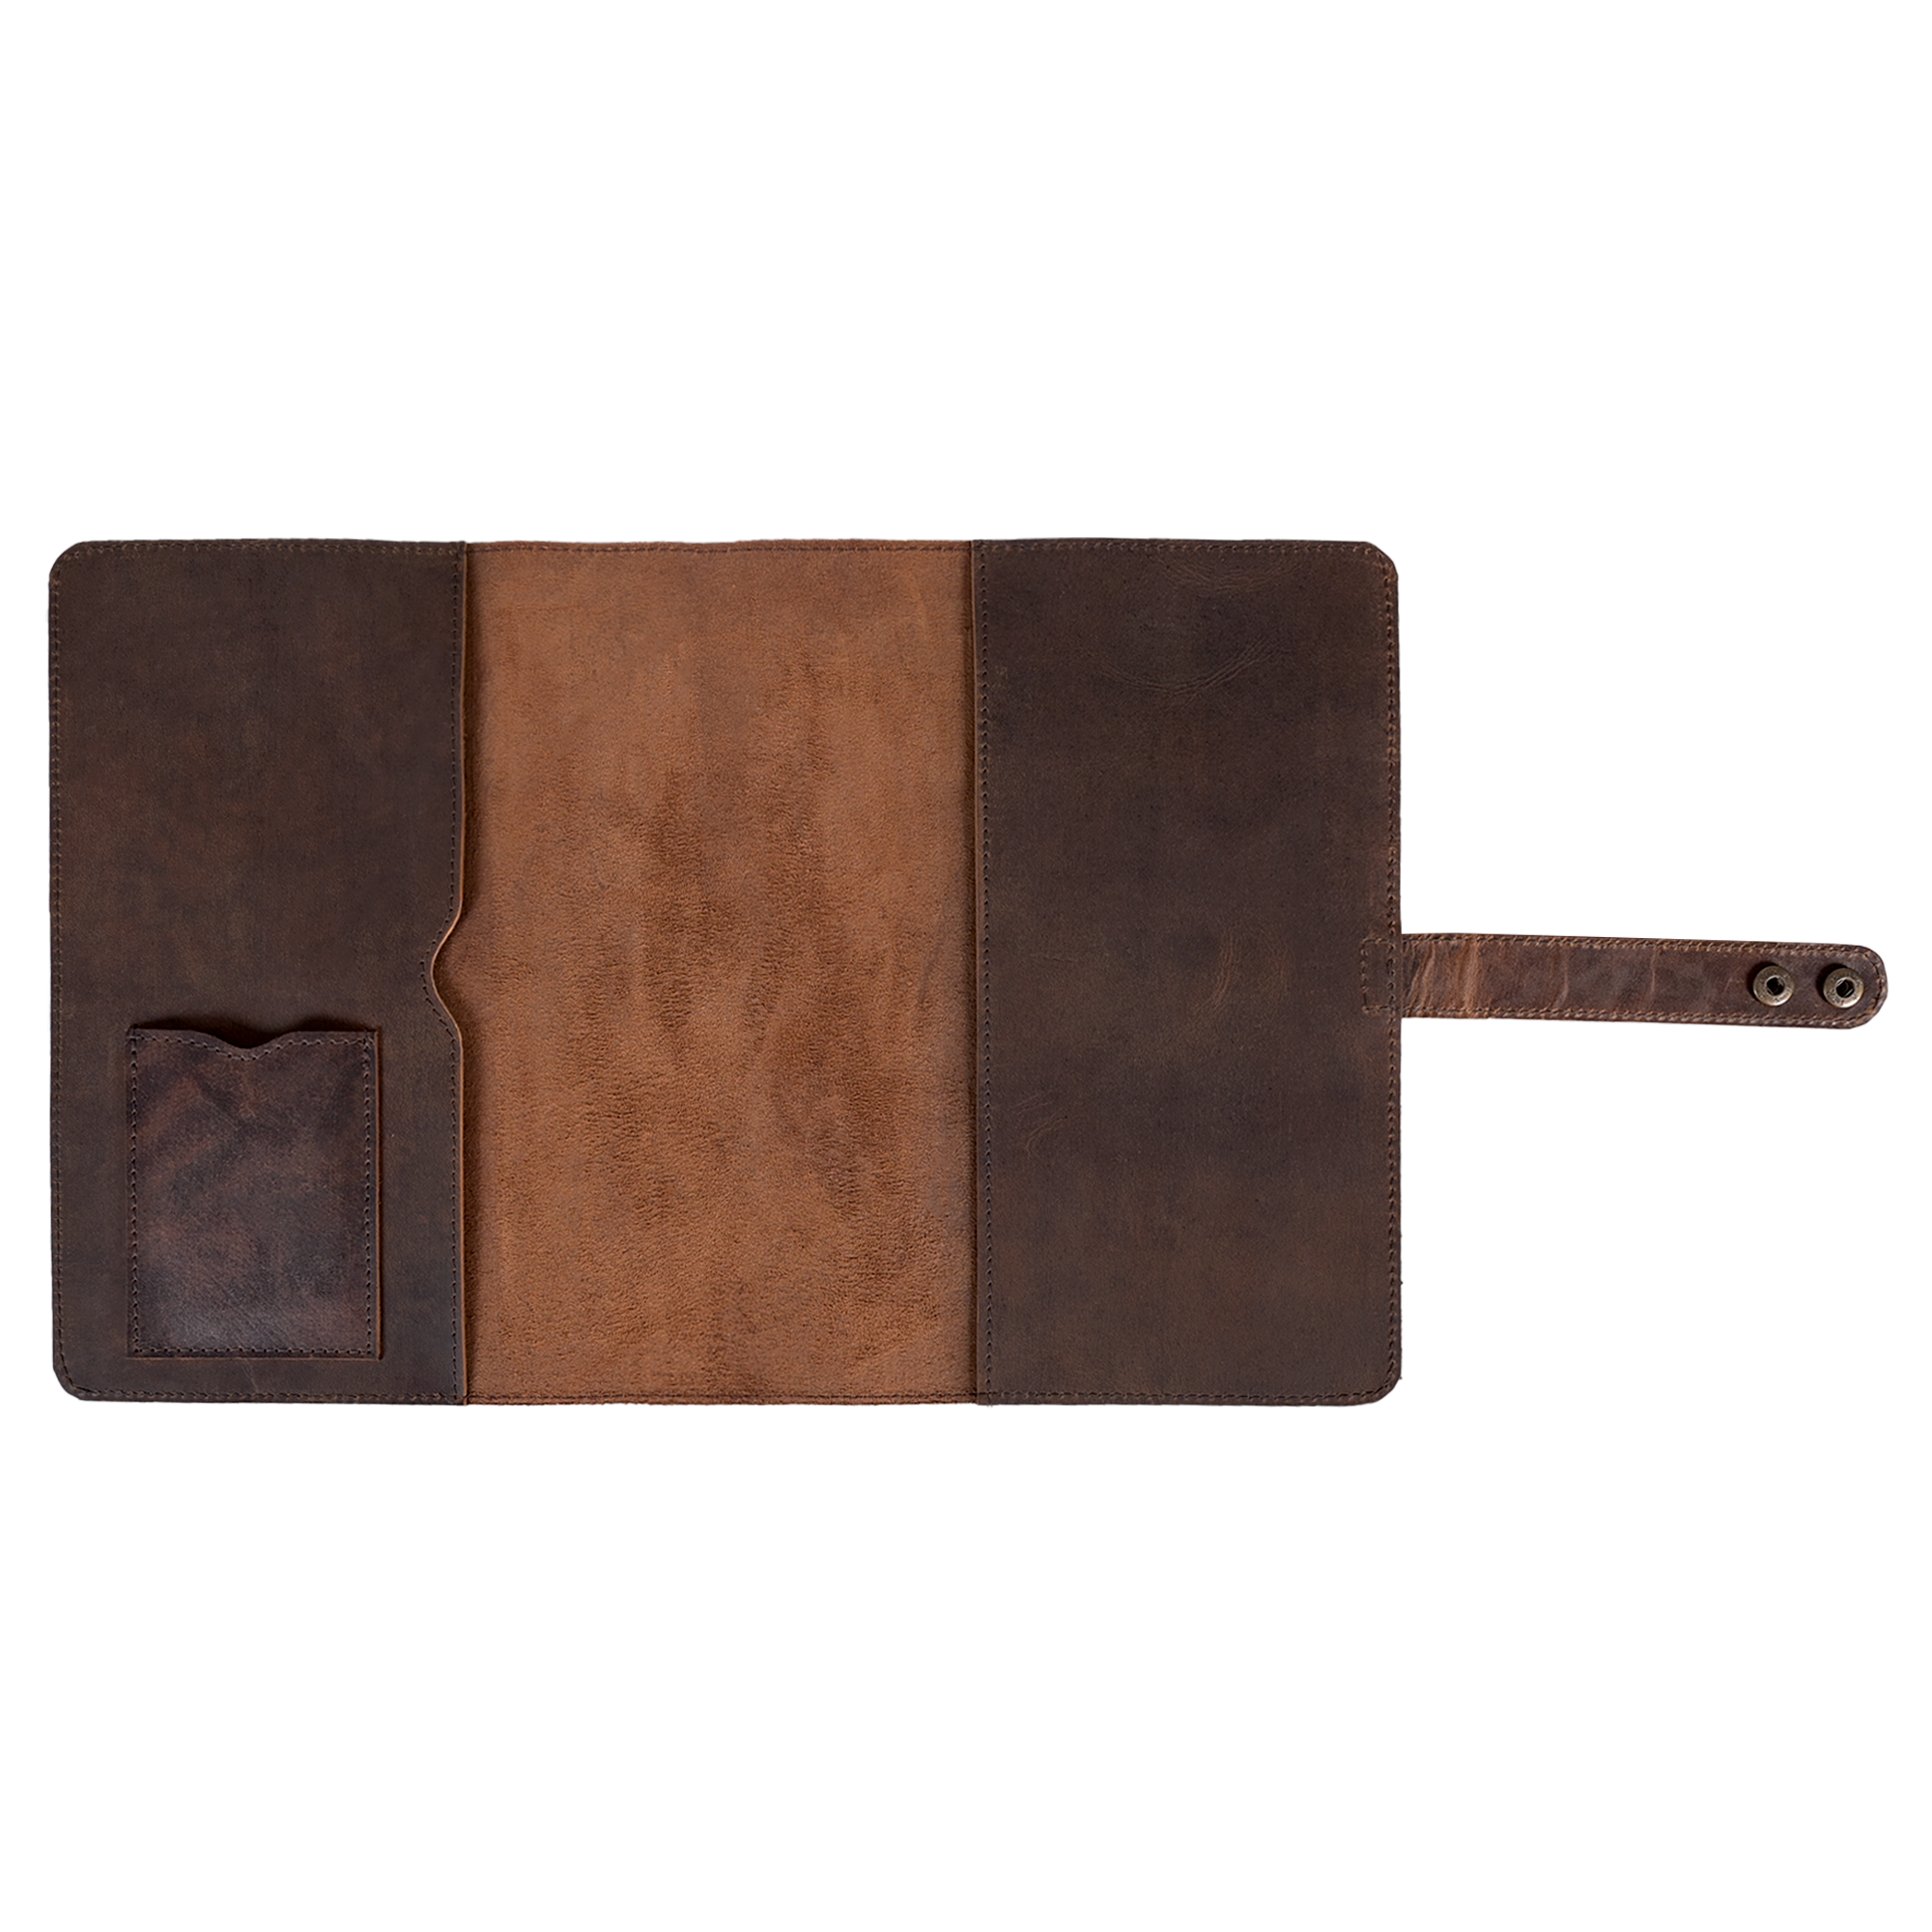 Medium Leather Bible Cover